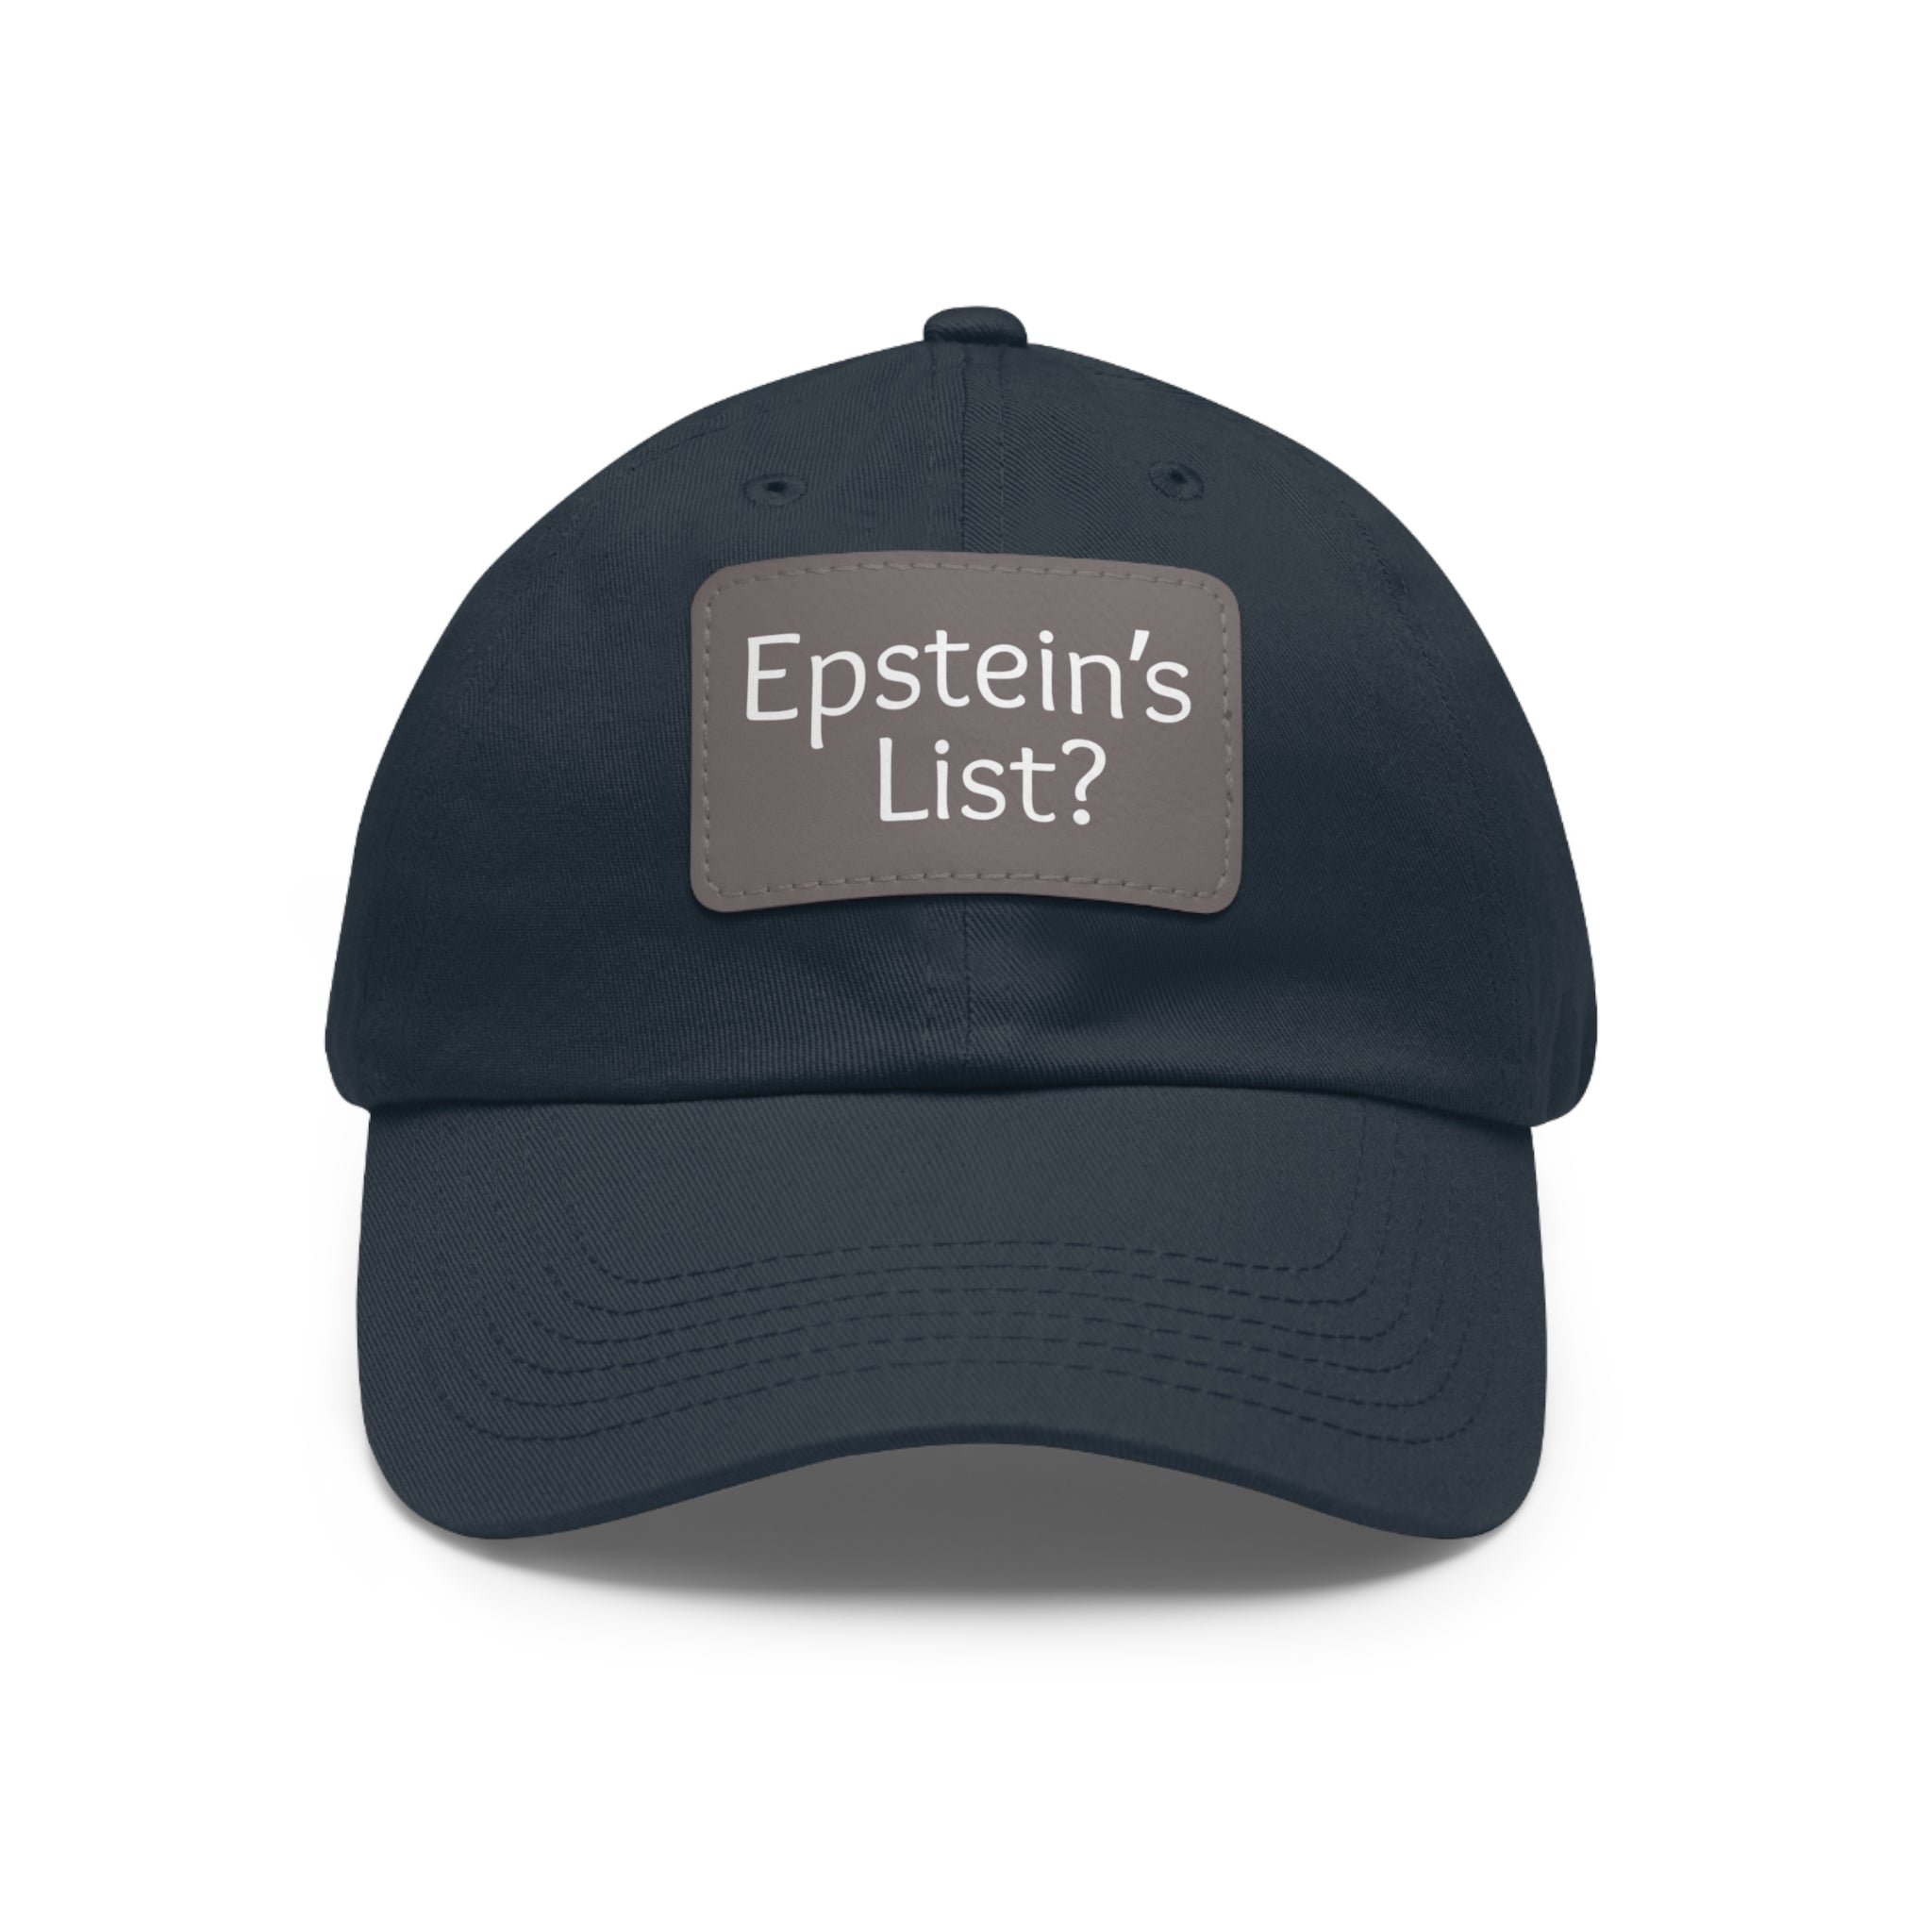 Epstein’s List? – Hat with Leather Patch